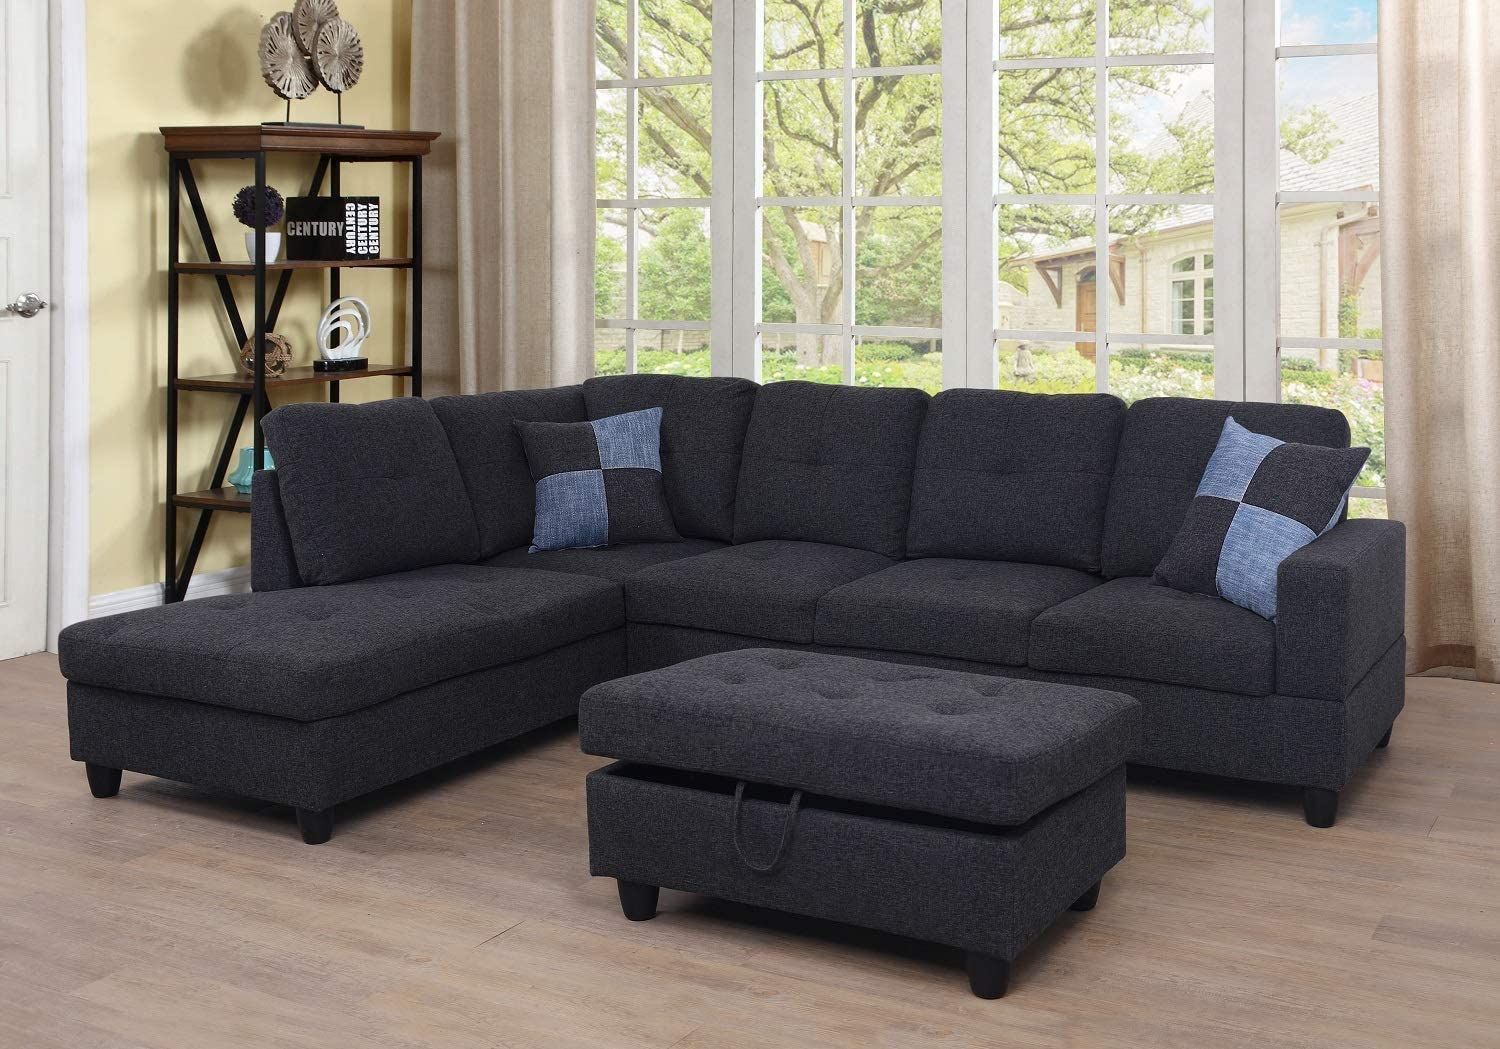 Ponliving Furniture 3 Pcpiece Sectional Sofa Couch Set, L Inside Hannah Right Sectional Sofas (View 1 of 15)